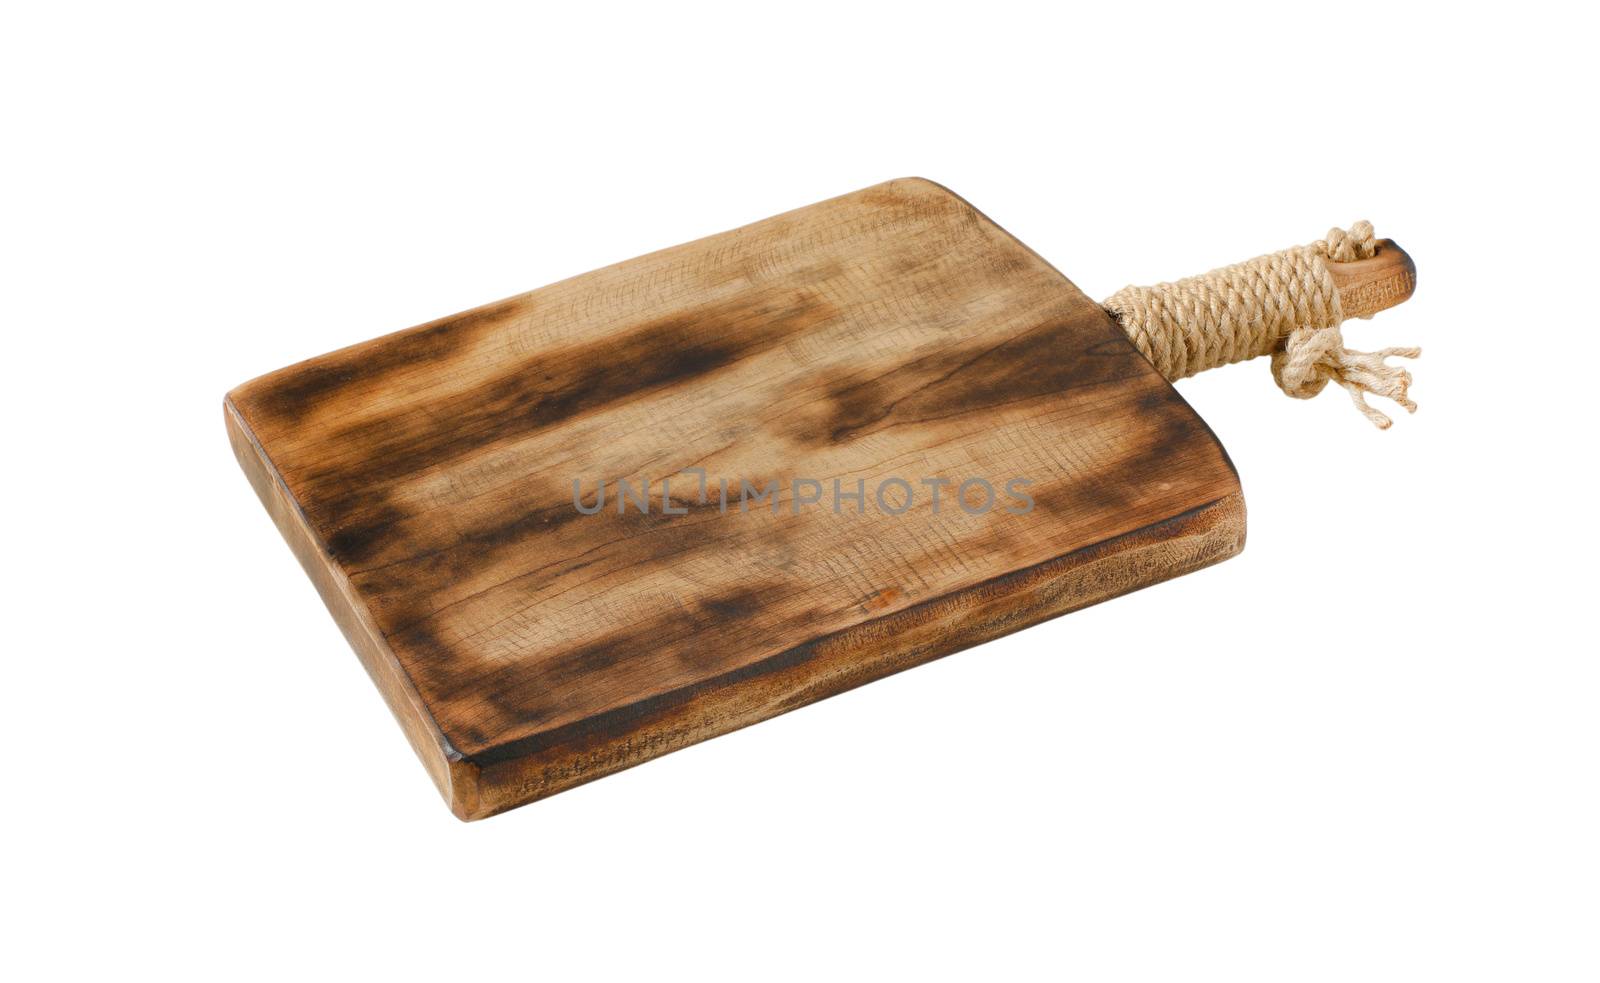 Rustic wooden cutting or serving board with handle isolated on white